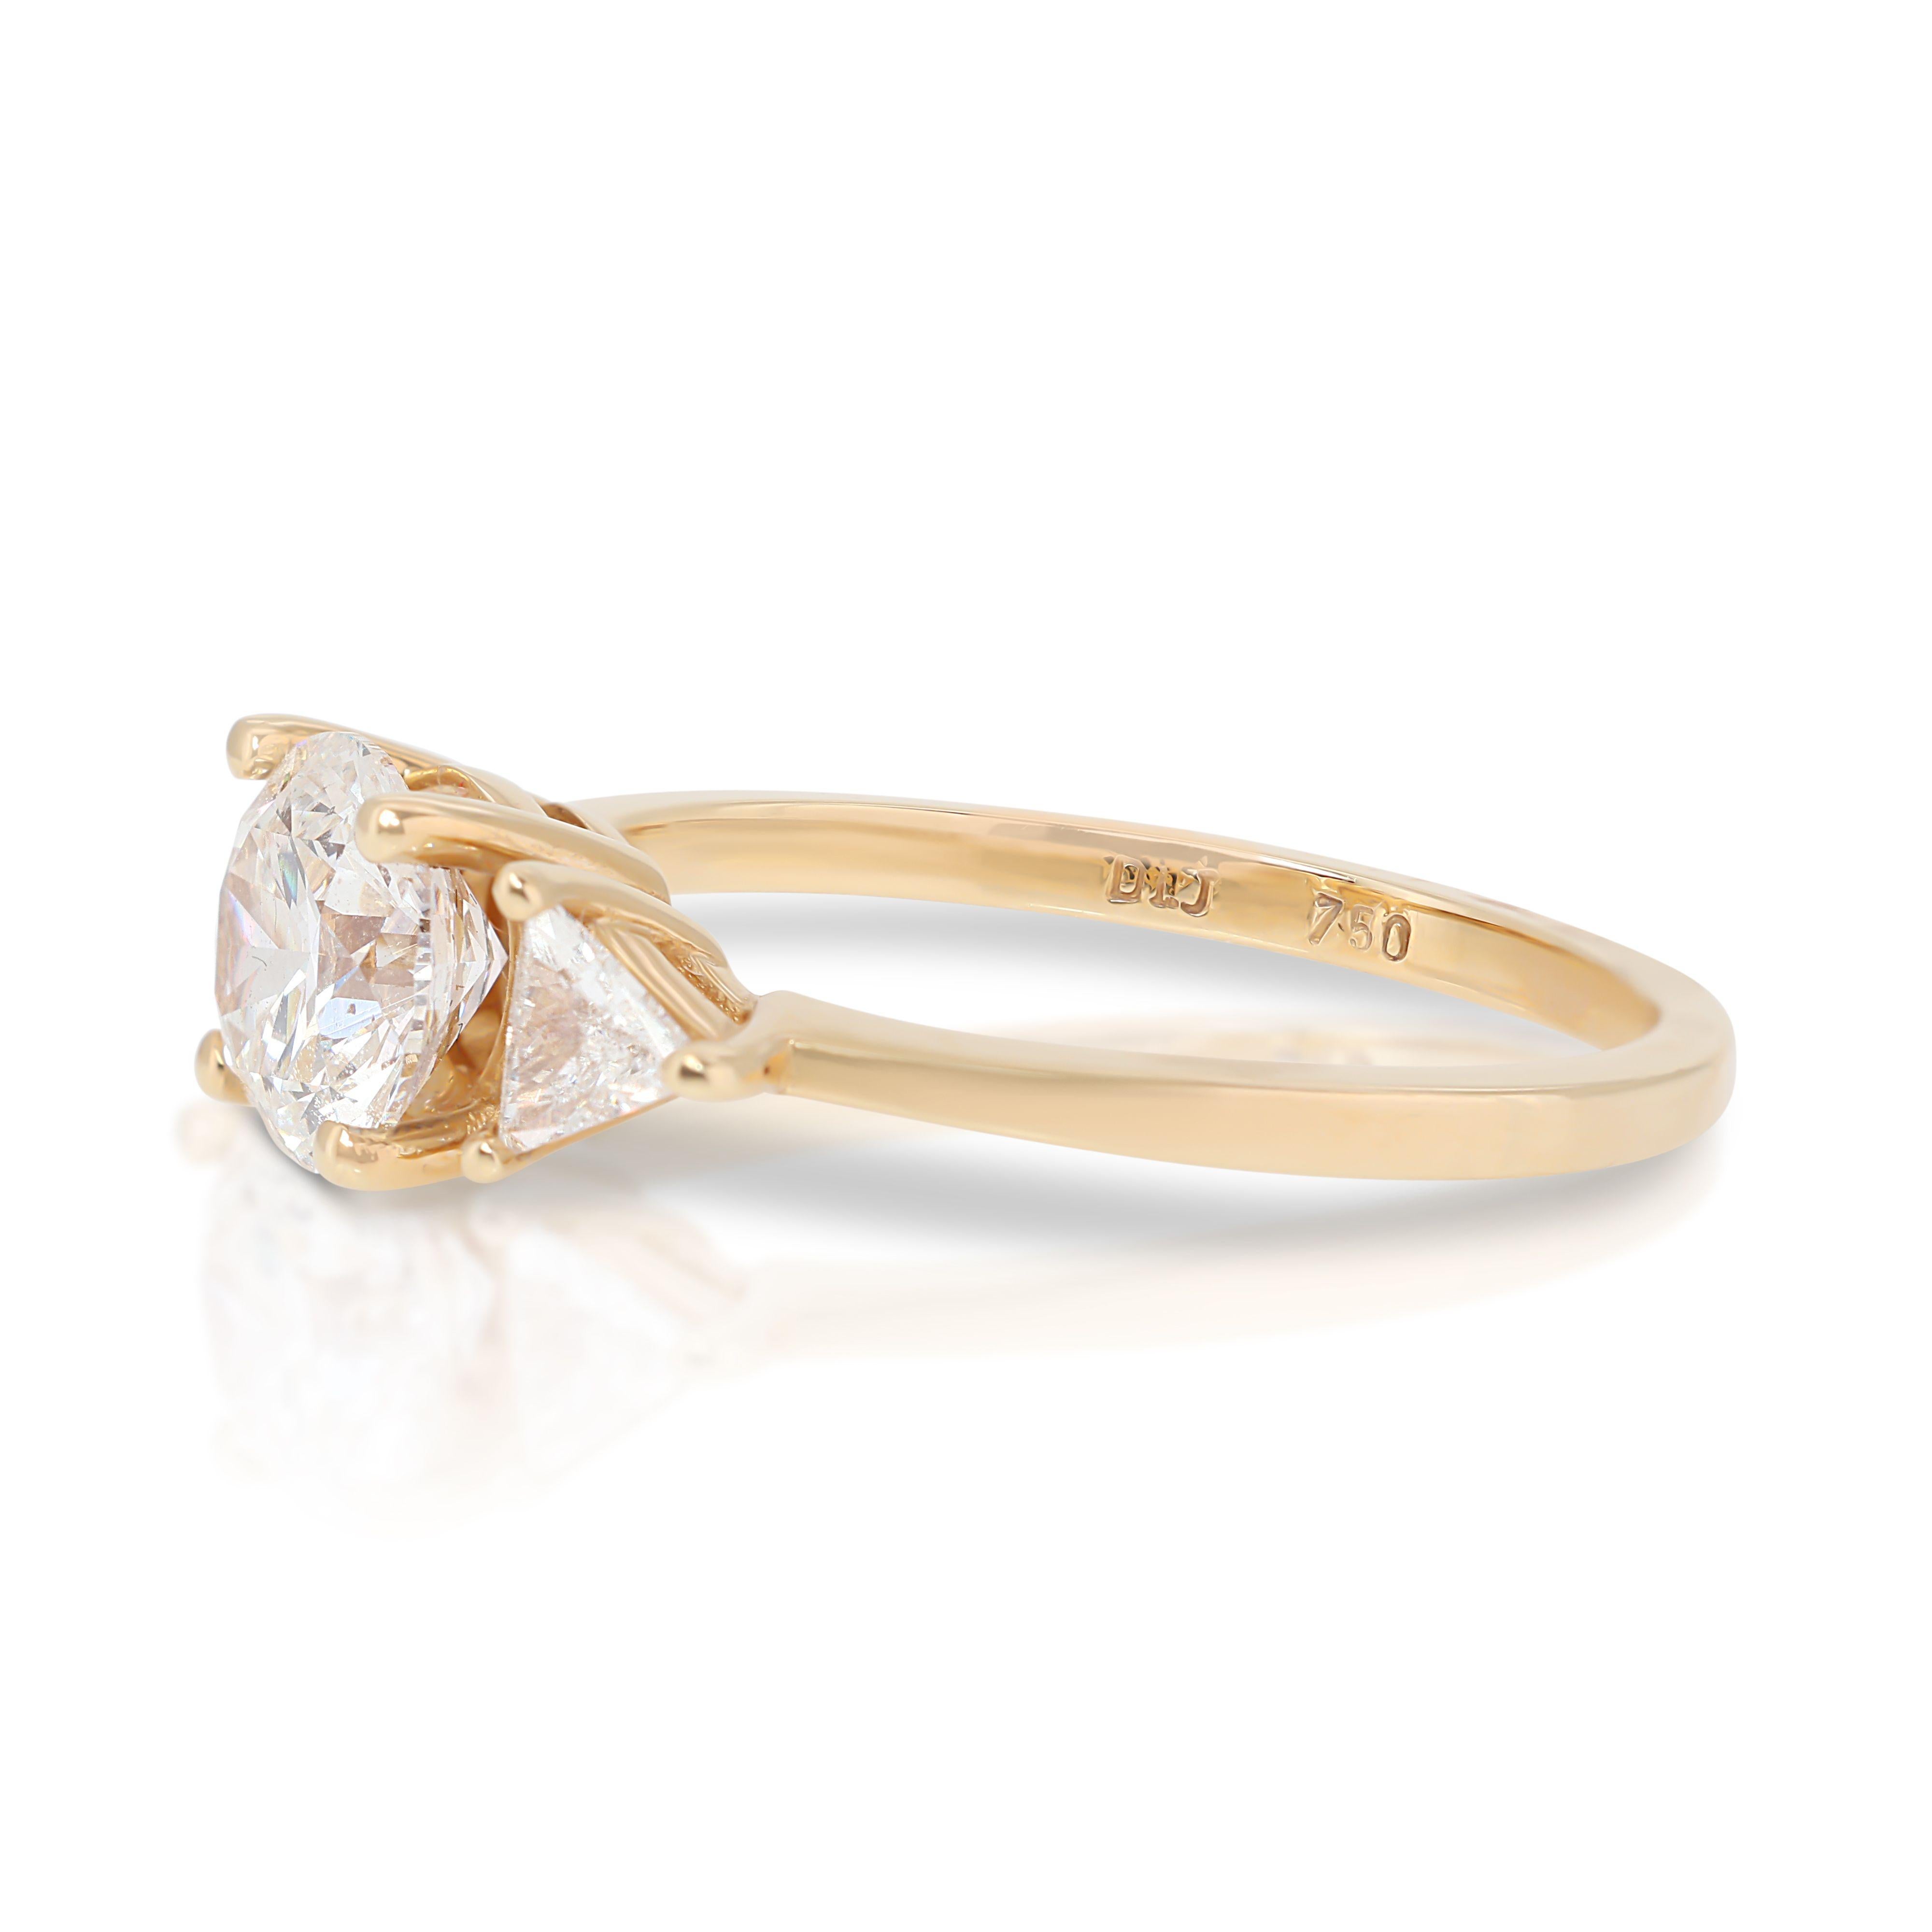 Captivating 3-stone 1.21ct Diamond Ring set in 18K Yellow Gold In New Condition For Sale In רמת גן, IL